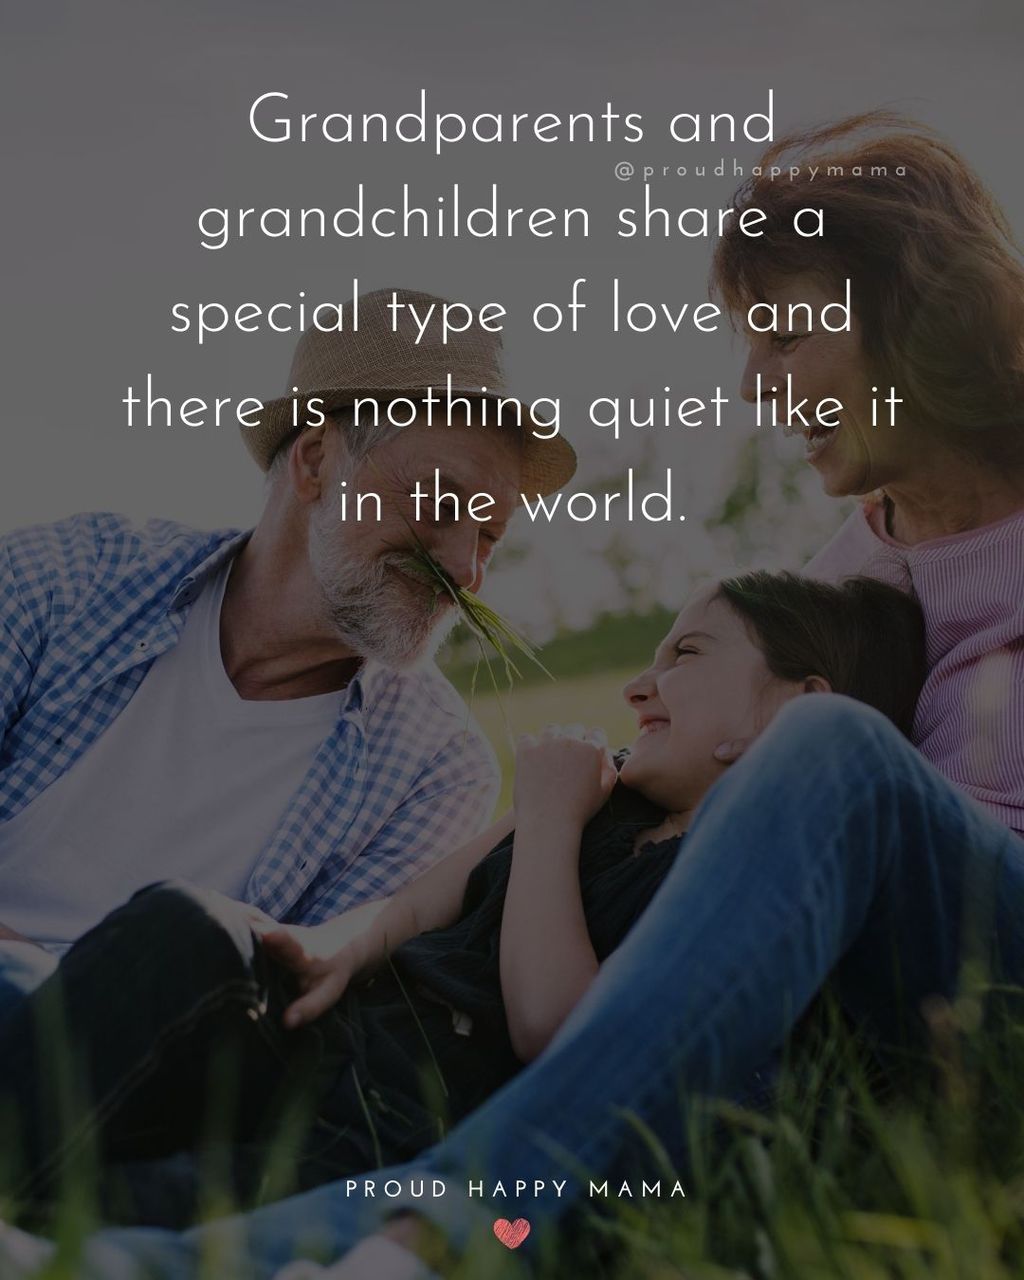 Quotes On Grandparents | Grandparents and grandchildren share a special type of love and there is nothing quiet like it in the world.